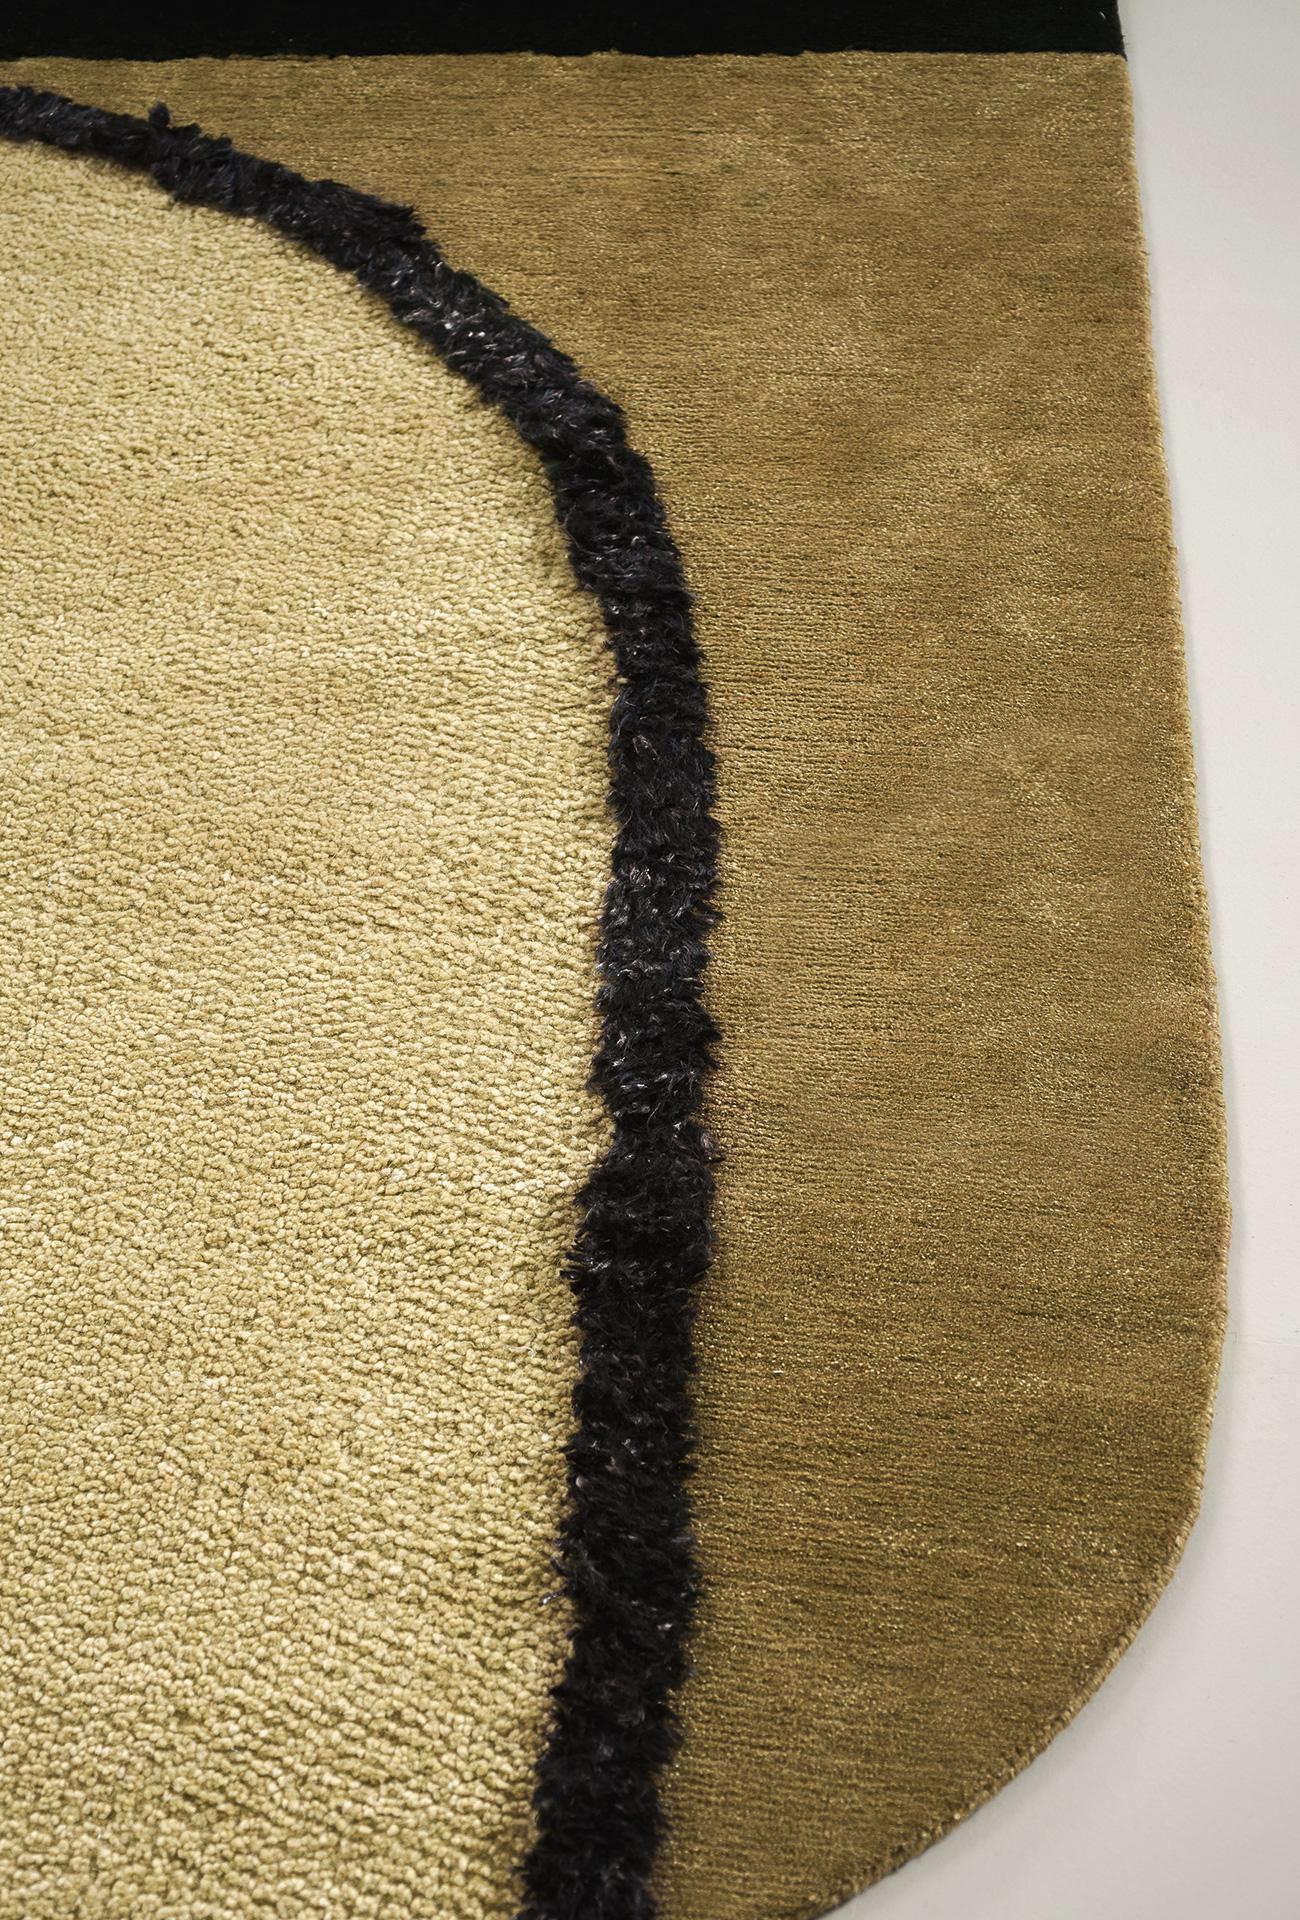 Designed by Baxter, Himani is a collection of iconic rugs produced in limited and numbered series. A combination of irregular shapes. Each rug is characterized by a series of contrasts: texture, three-dimensional elements, uneven surfaces matched